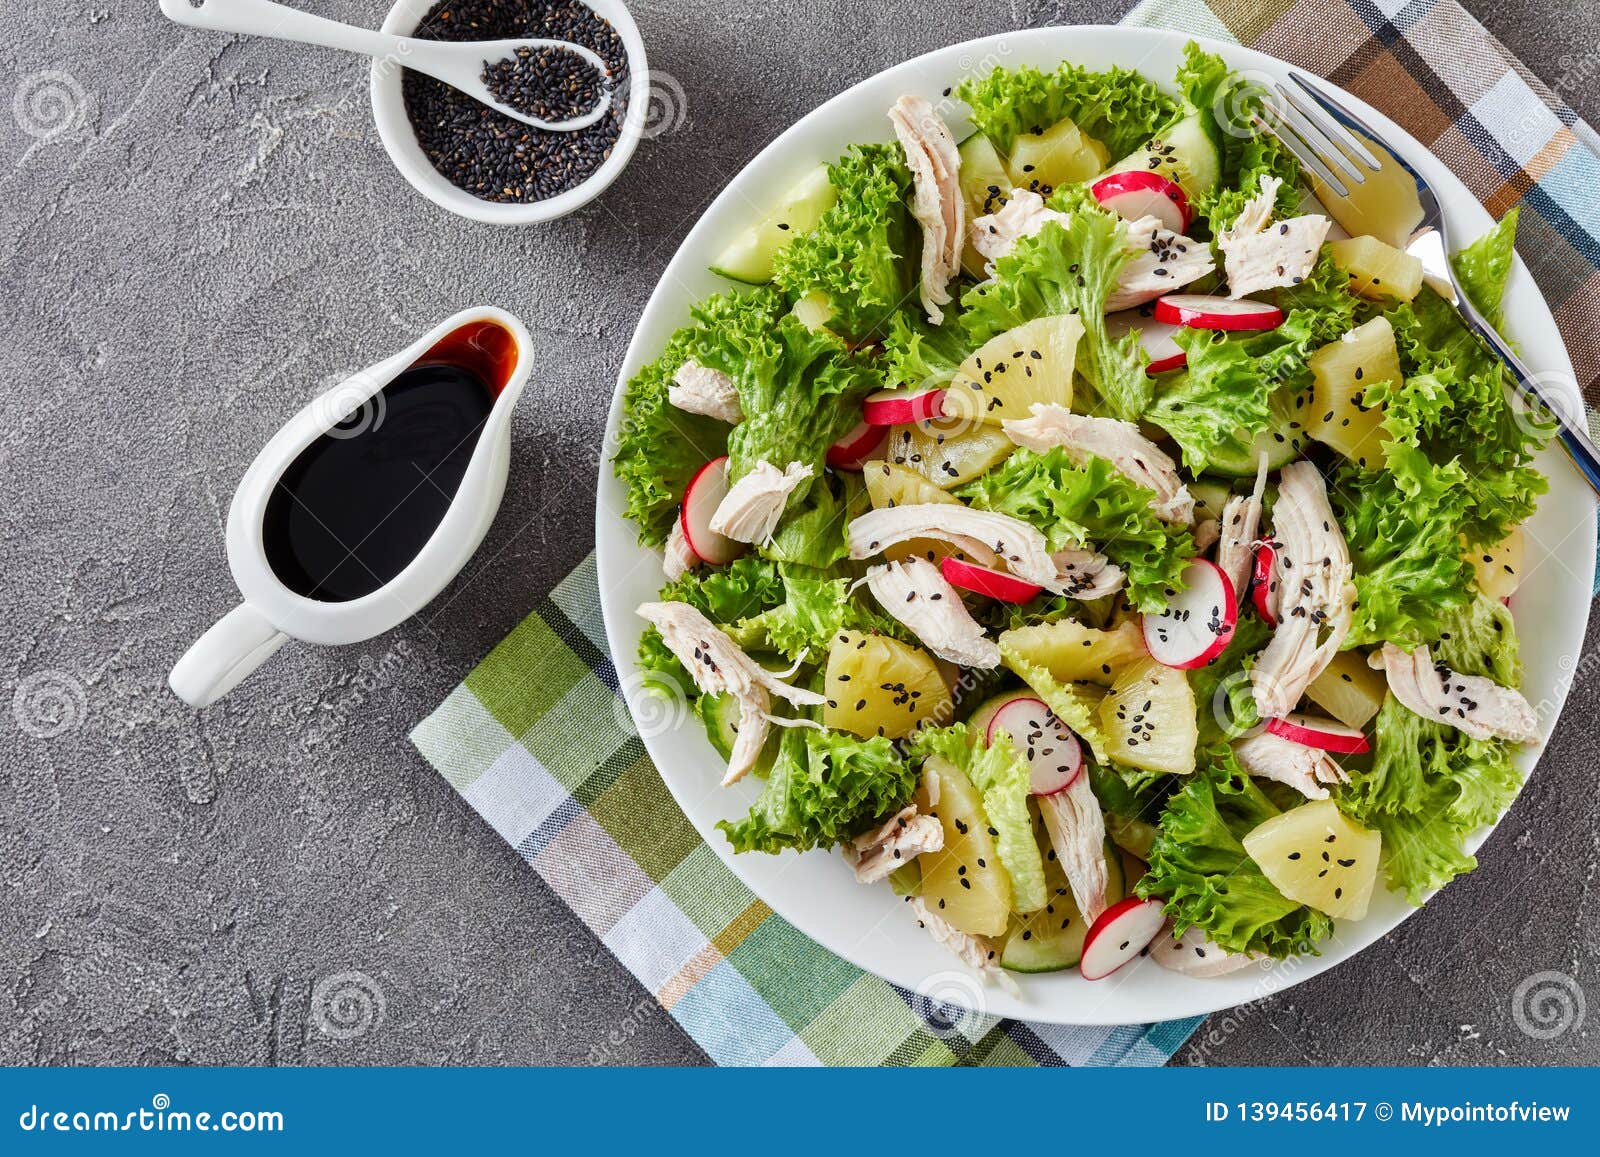 Chicken, Lettuce Salad with Ananas and Veggies Stock Image - Image of ...